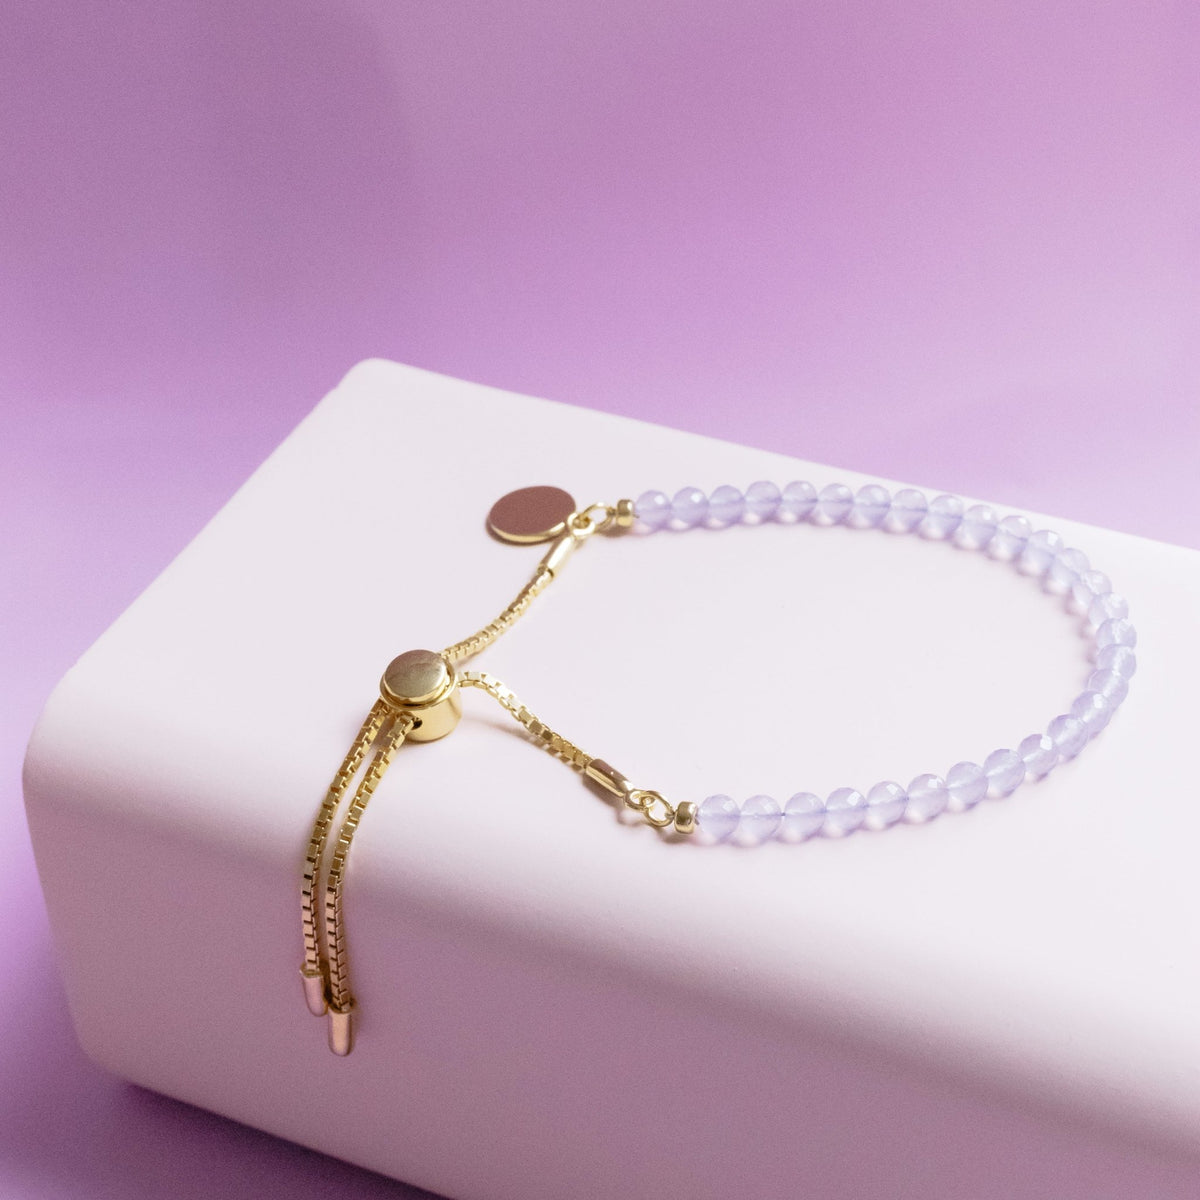 ICONIC ADJUSTABLE BRACELET - LAVENDER CHALCEDONY &amp; GOLD - SO PRETTY CARA COTTER